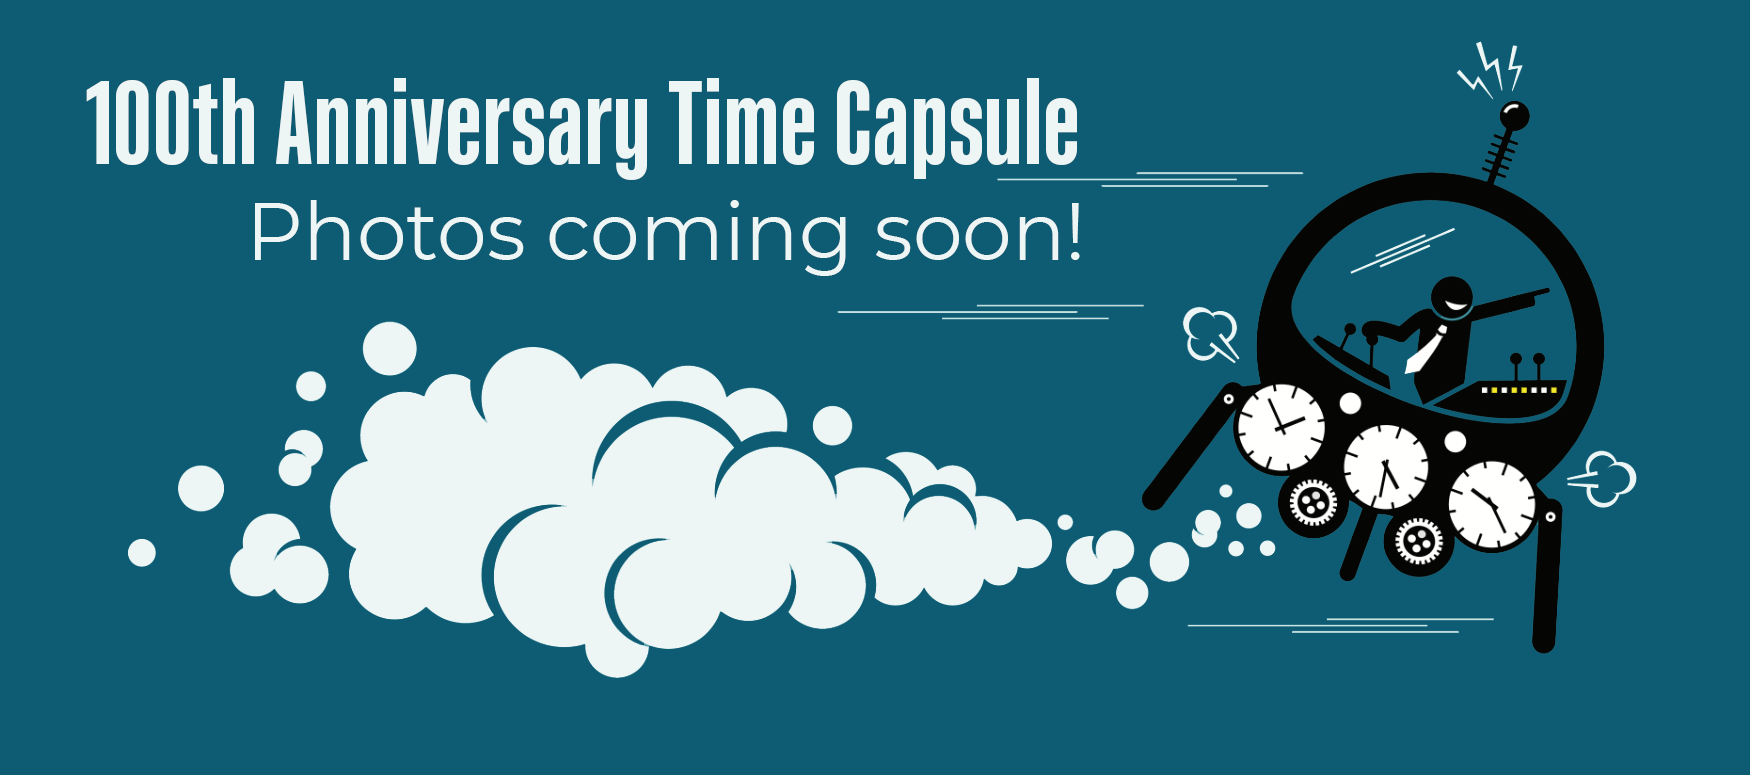 100th Anniversary Time Capsule photos coming soon